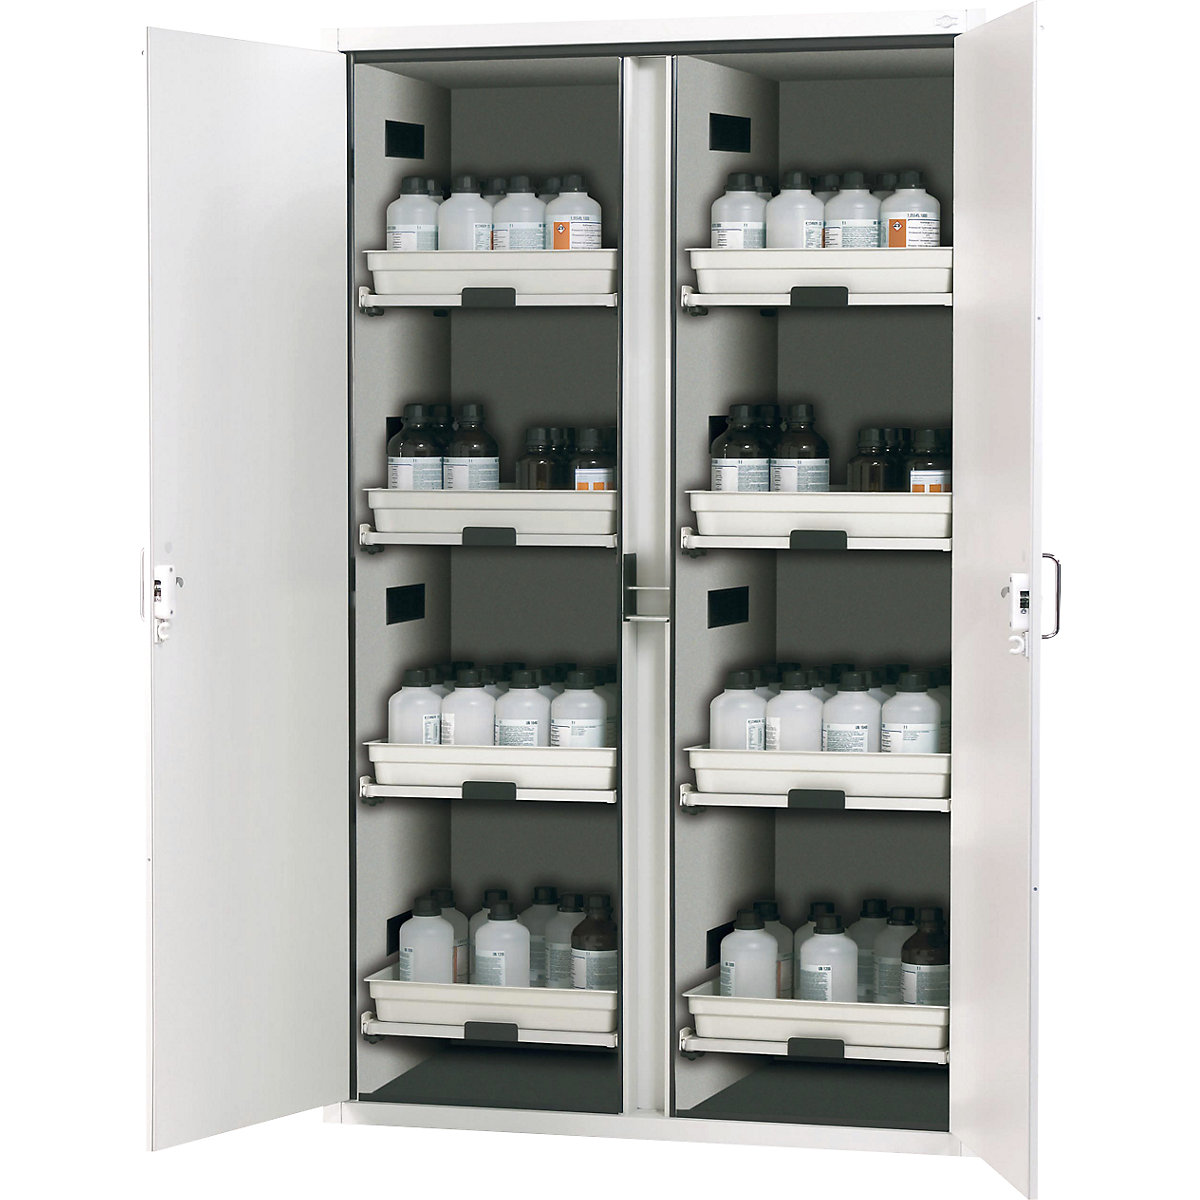 Full height safety cupboard for acids and alkalis - asecos